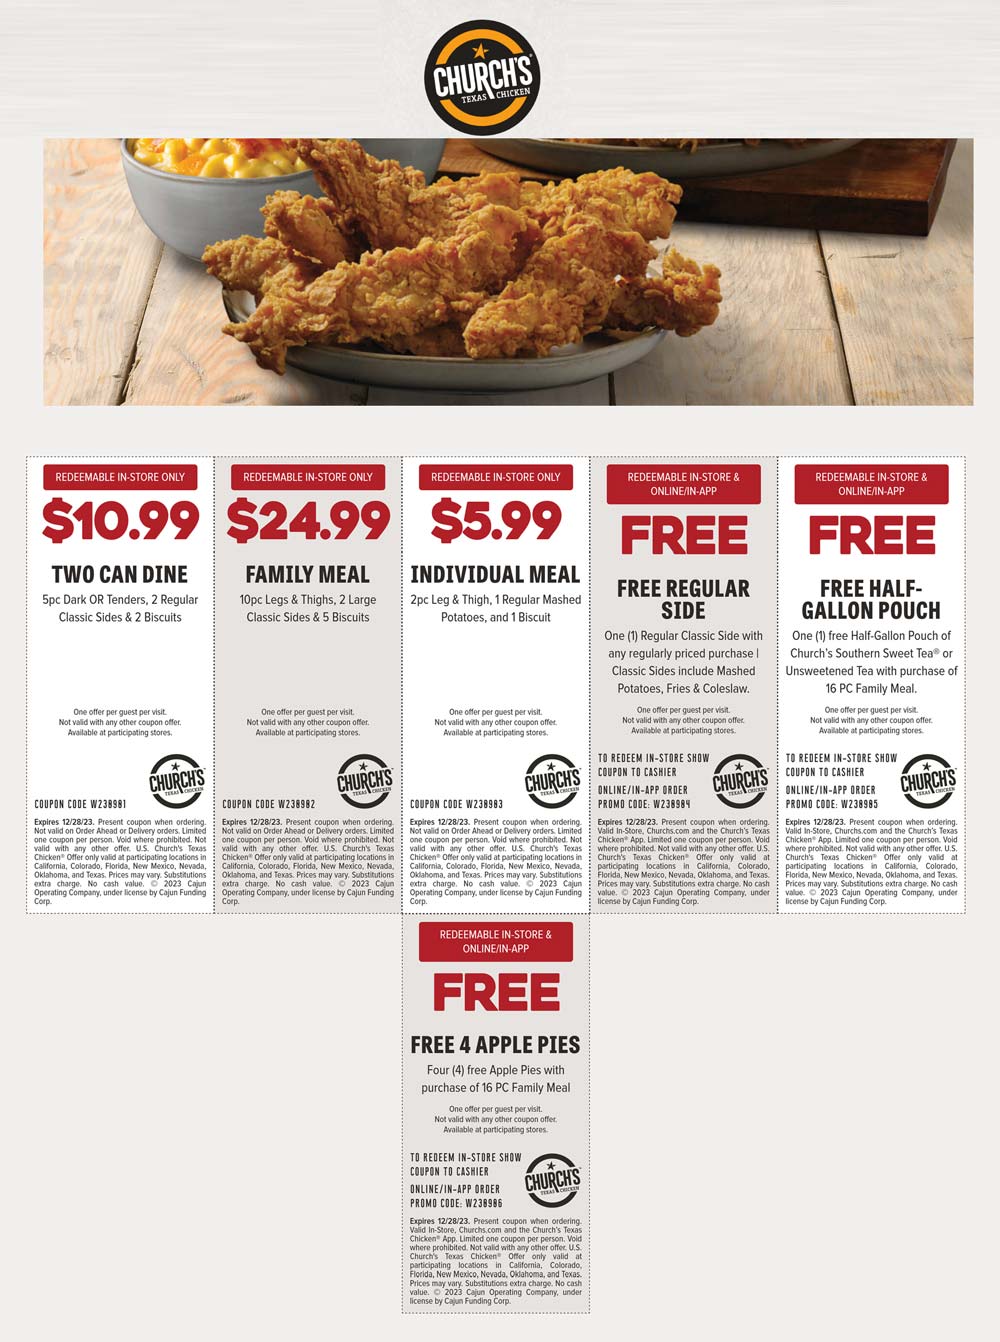 4 free apple pies with your family meal & more at Churchs Texas Chicken #churchstexaschicken